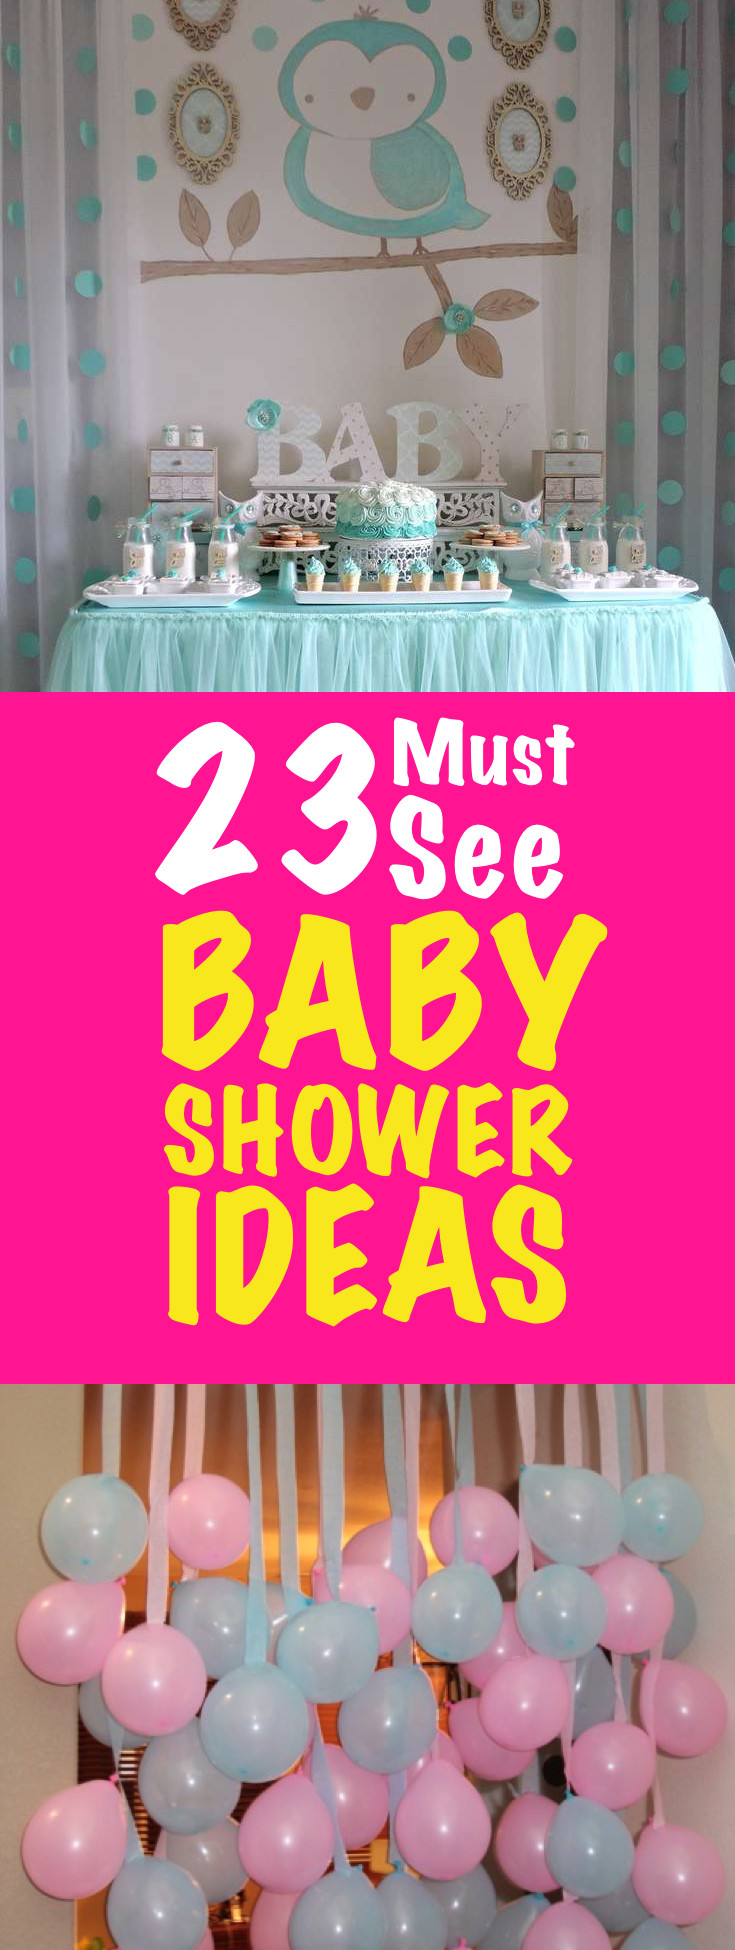 Cheap DIY Baby Shower Decorations
 23 Must See Baby Shower Ideas